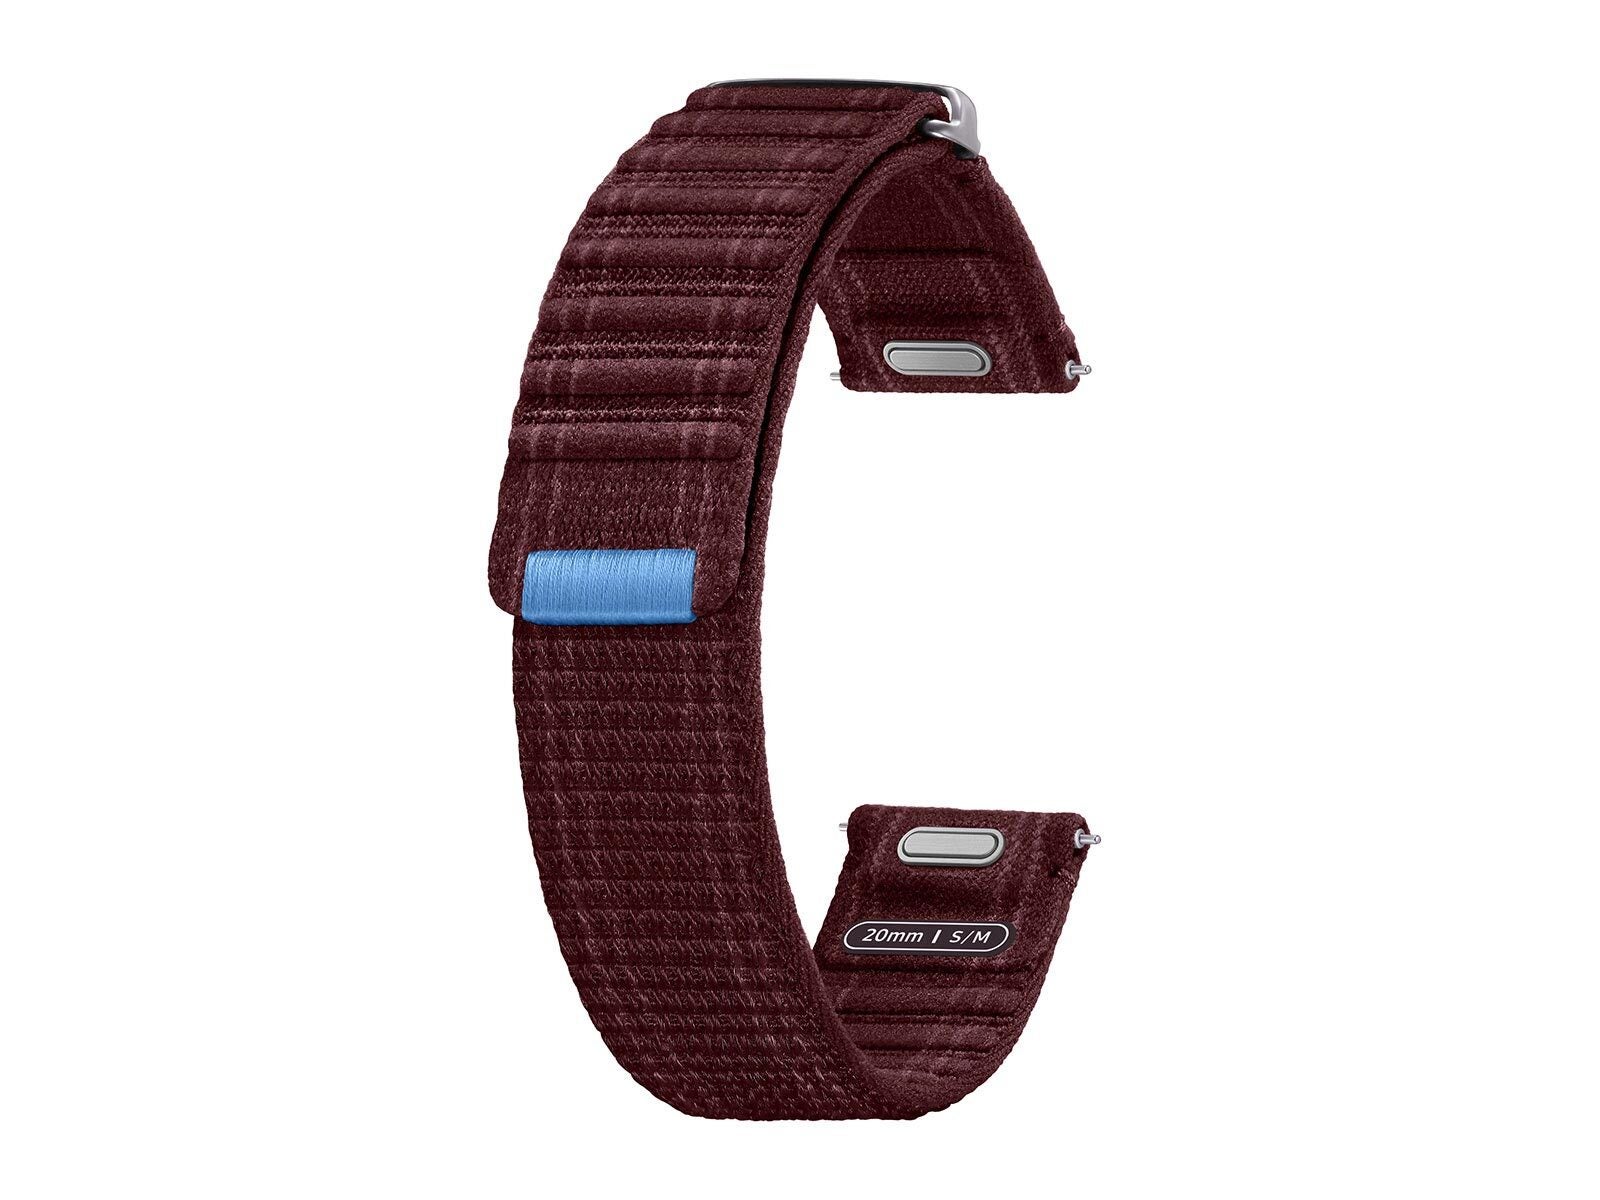 The&amp;nbsp;Galaxy Watch 7 Fabric Band by Samsung offers style and some cool colors - The best Samsung Galaxy Watch 7 series replacement bands and straps